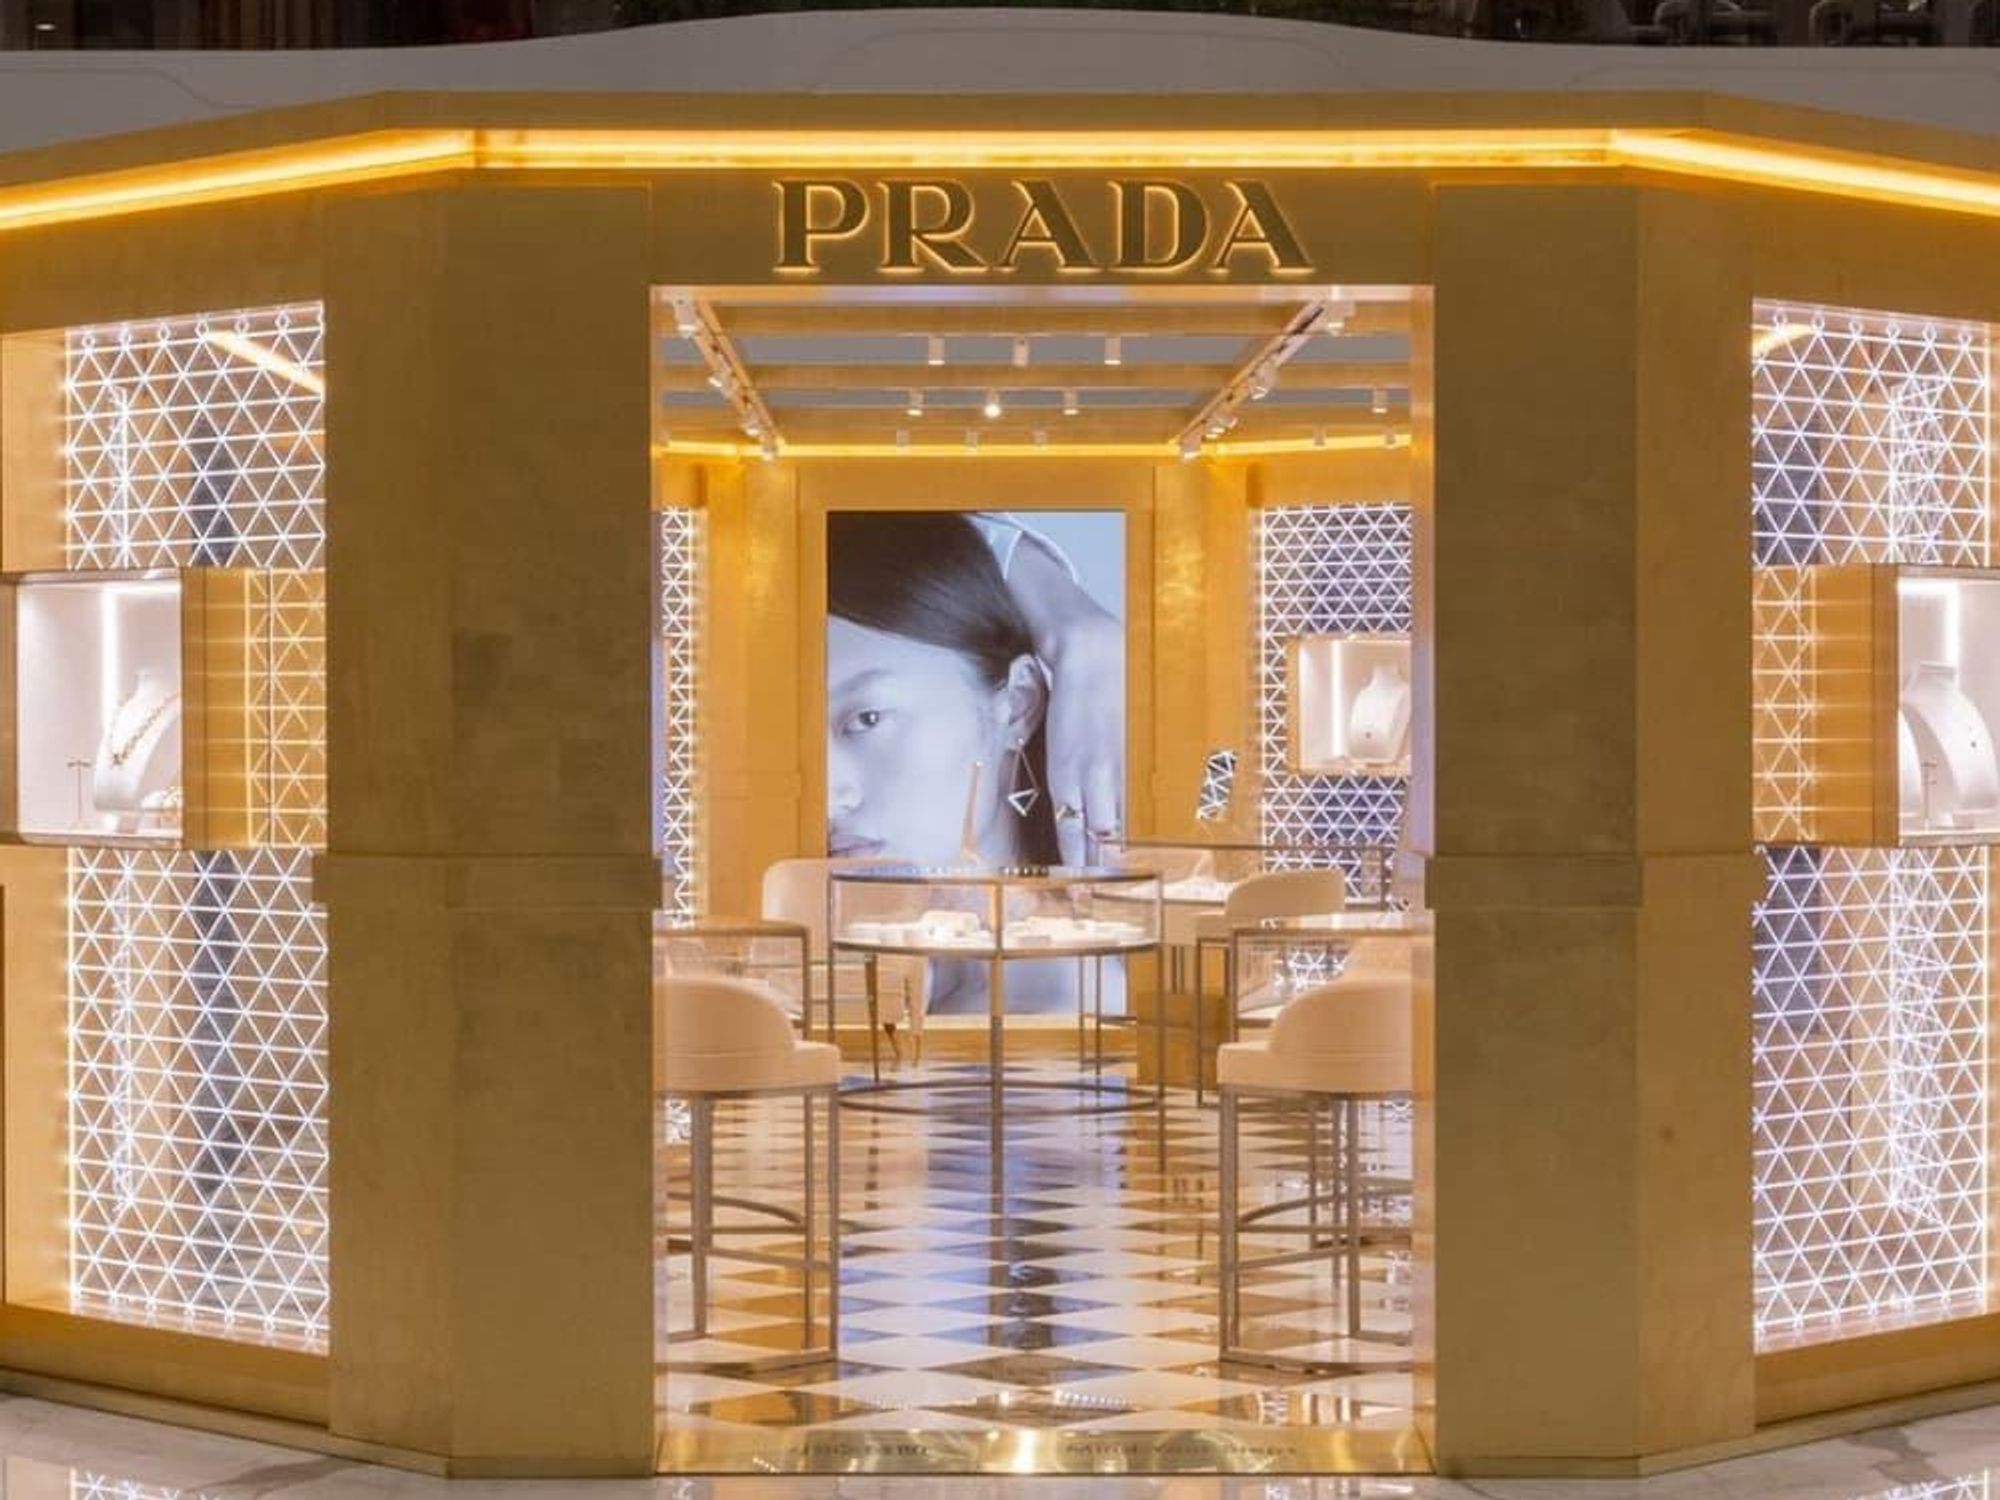 The Family Owned Prada Integrated Business Model In A Nutshell